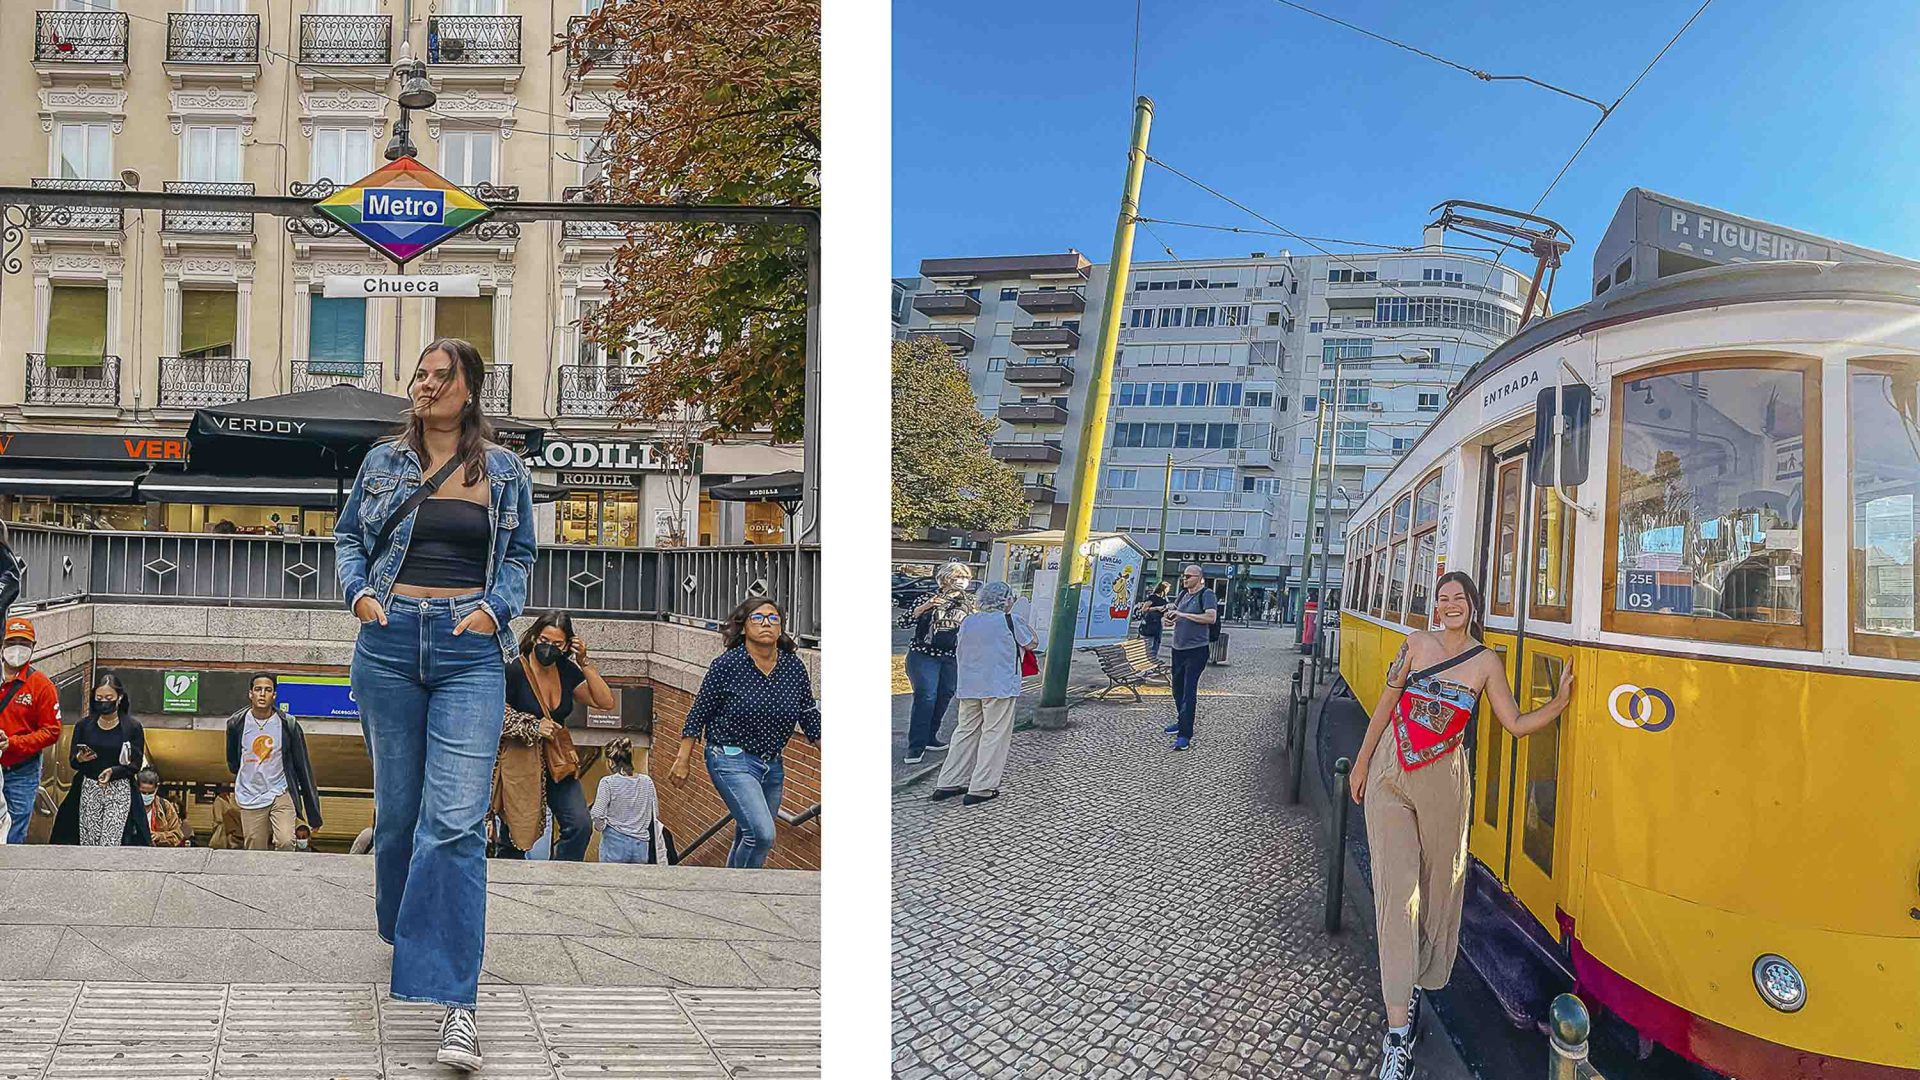 Left: Courtney leaves the metro in Chueca, Madrid, a historically gay neighbourhood. Right: Courtney in front of a yellow tram in Lisbon, Portugal.